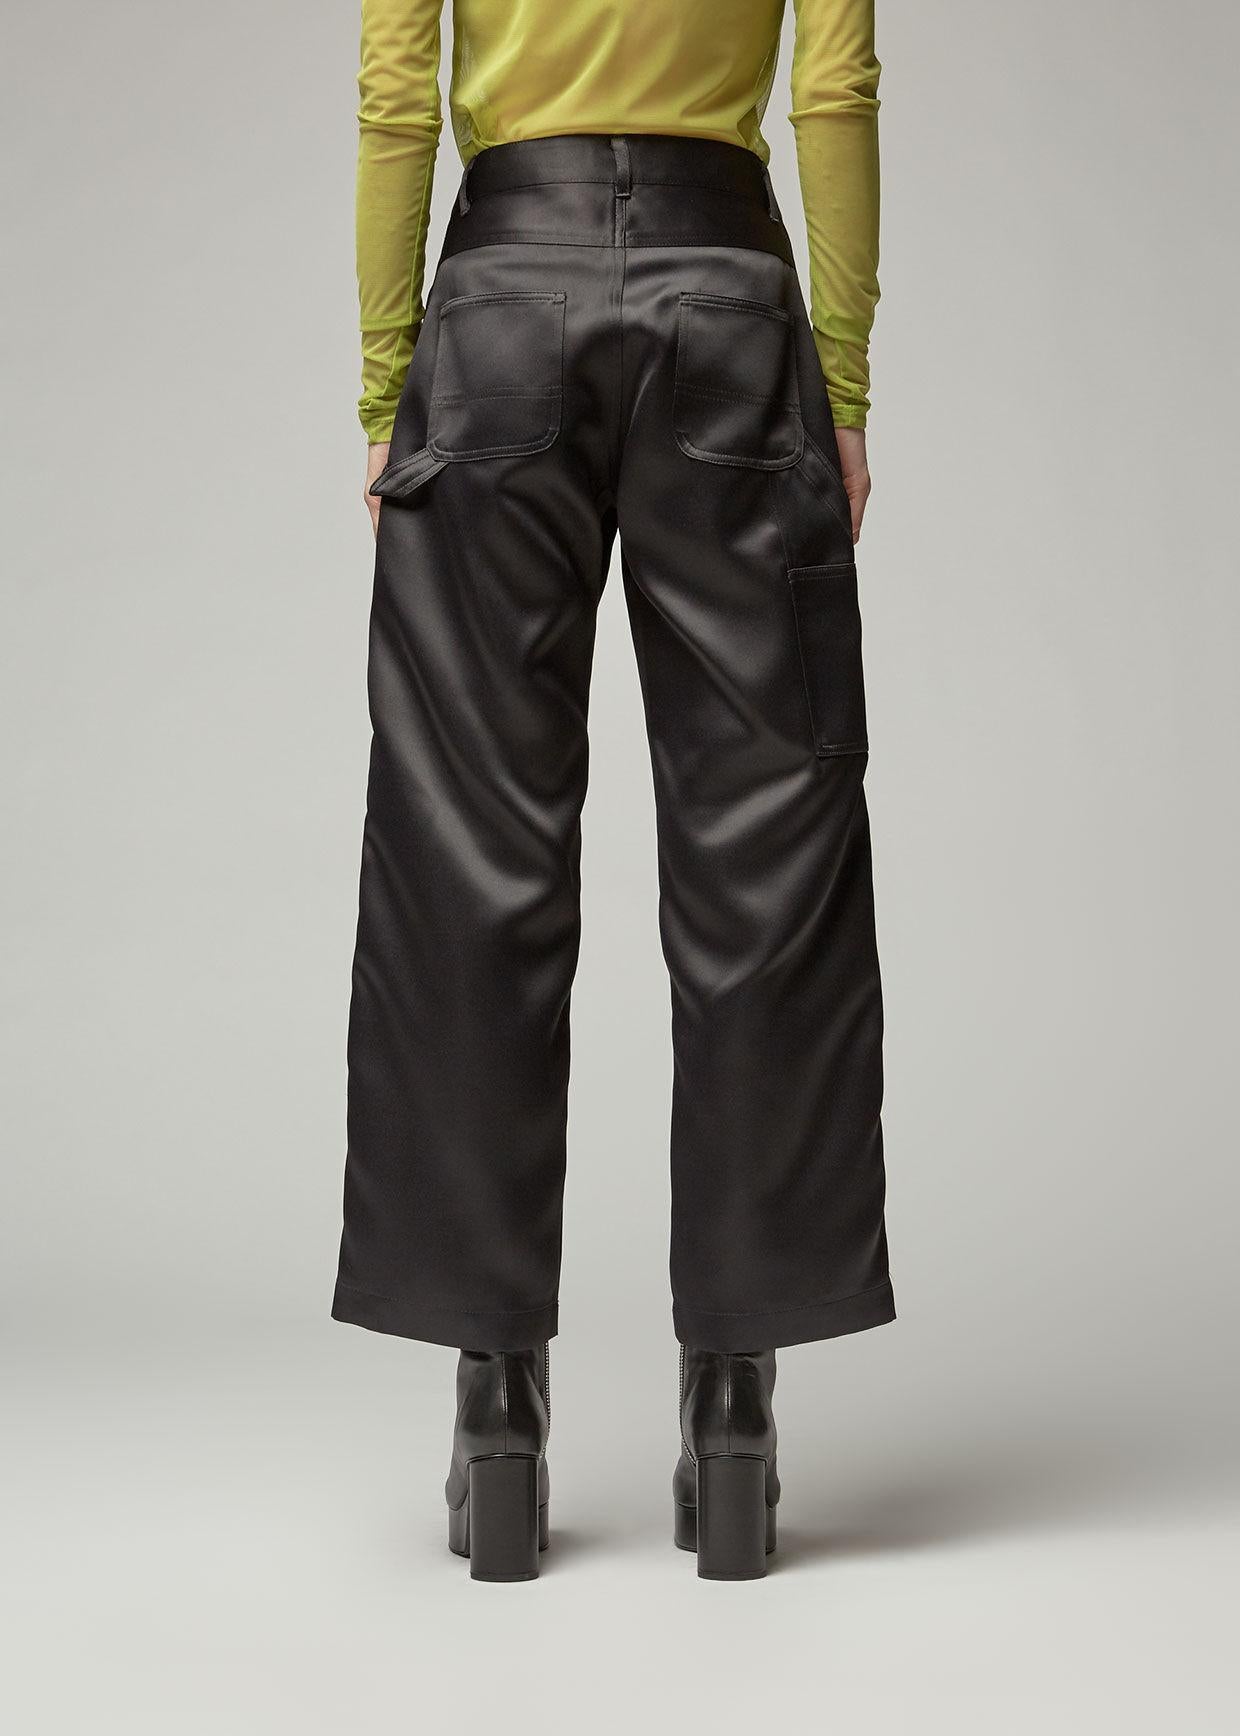 Shop for Textured 4 Way Stretch Pants with Reflective Detail for